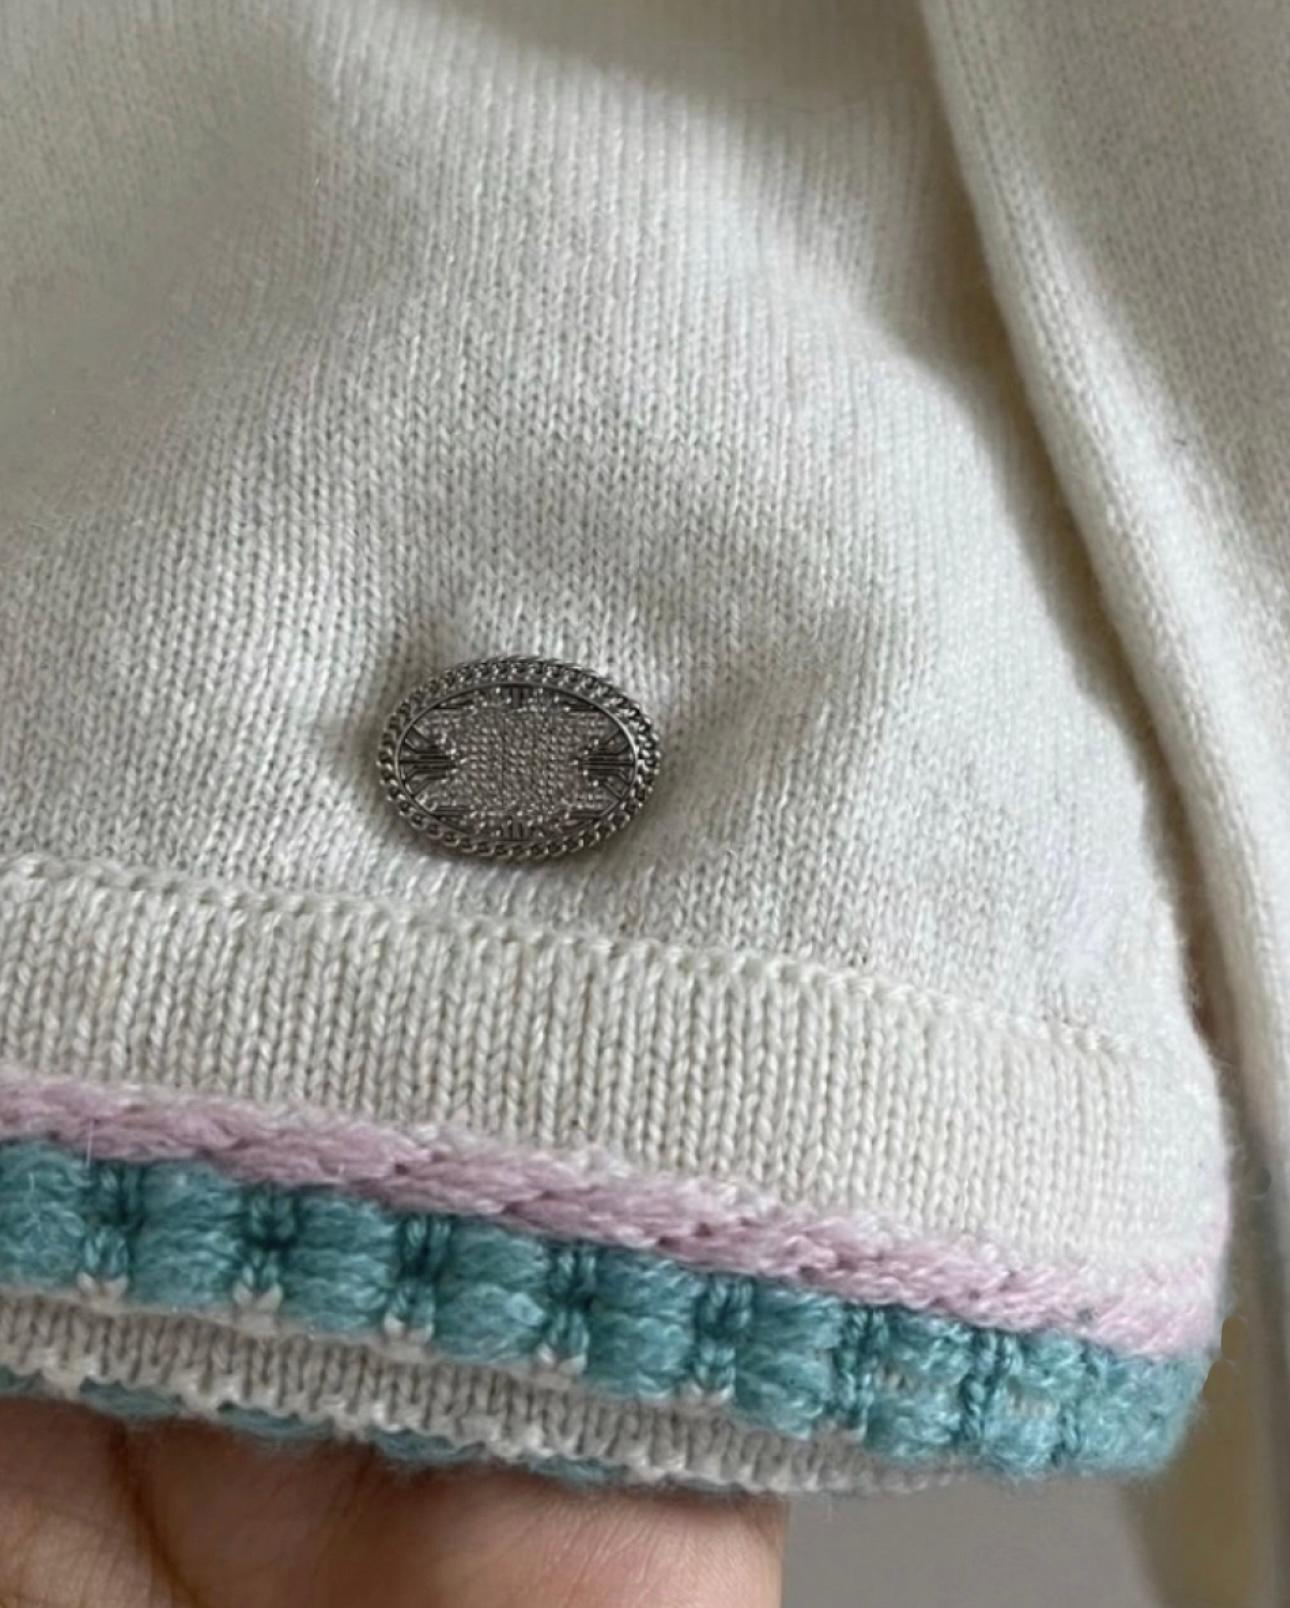 Chanel ecru cashmere jumper from Paris / SEOUL Cruise Collection
- CC logo charm at side
Size mark 42 FR. Pristine condition.